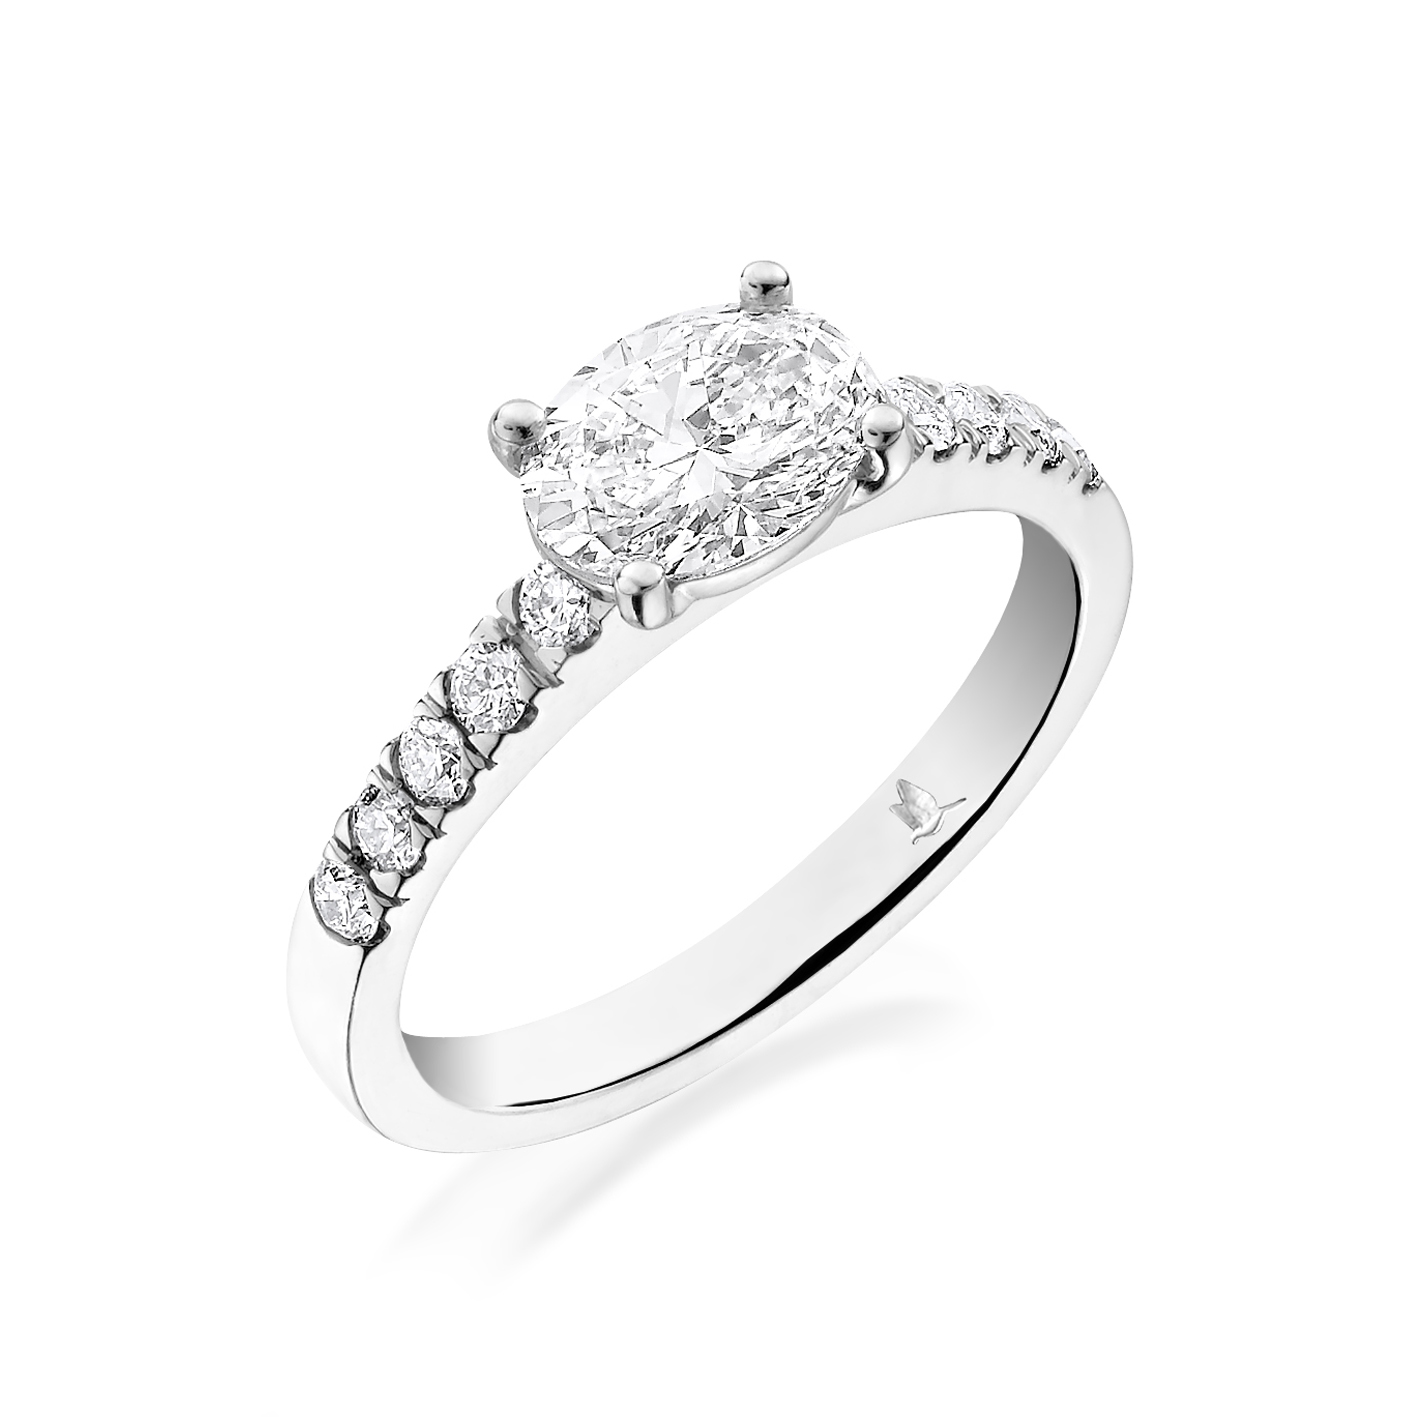 Oval diamond ring with diamond shoulders